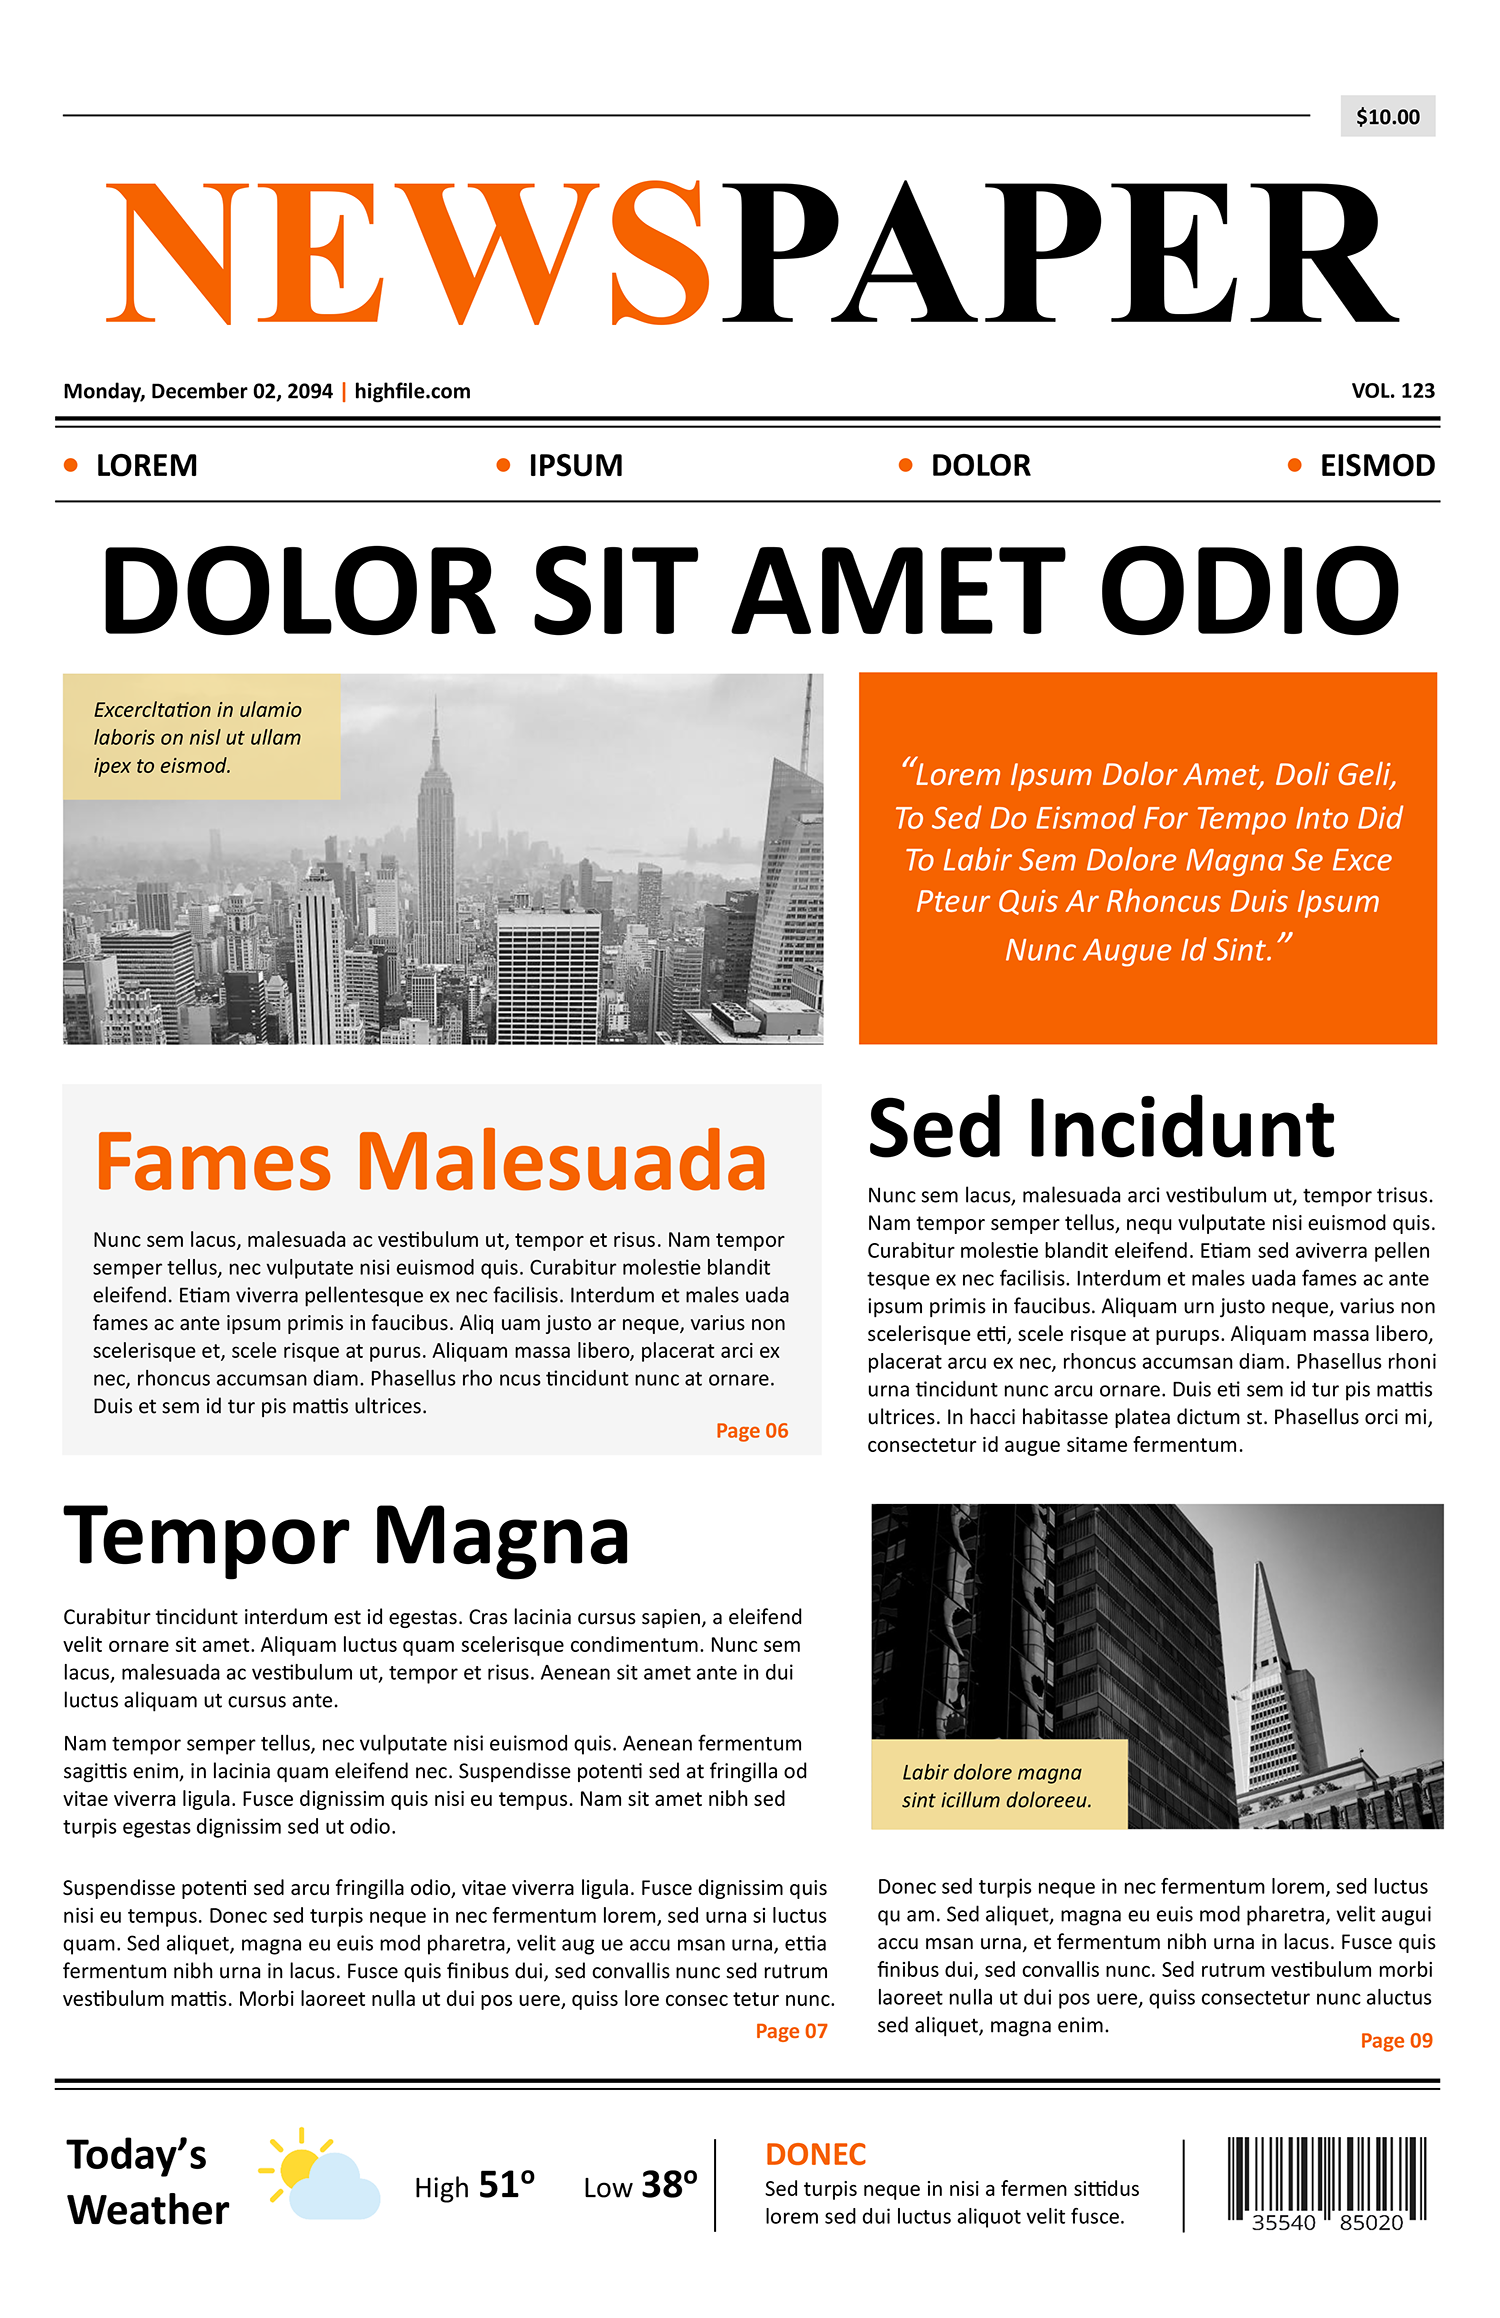 11x17 in Tabloid Newspaper Front Page Template - Page 01